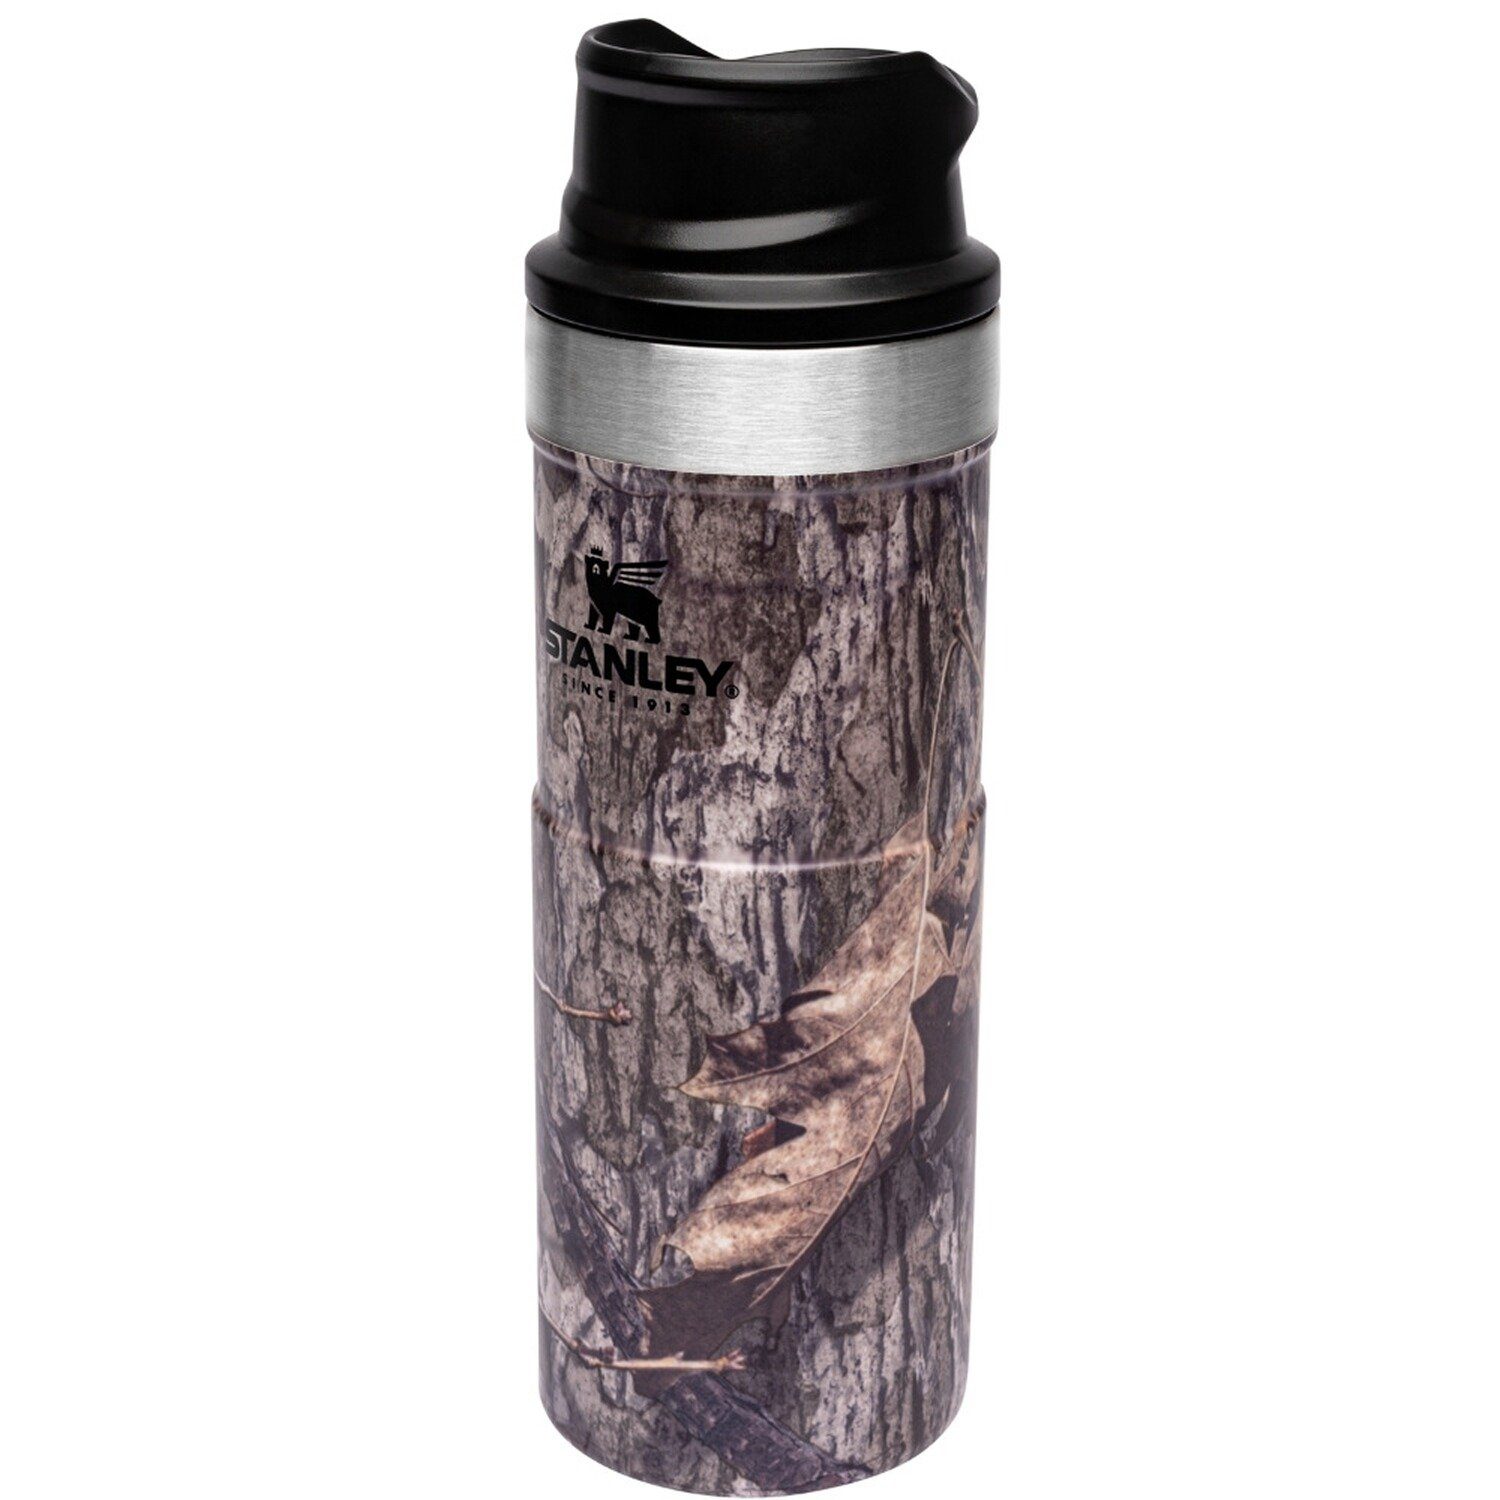 Mossy Oak STANLEY Country Isolierflasche